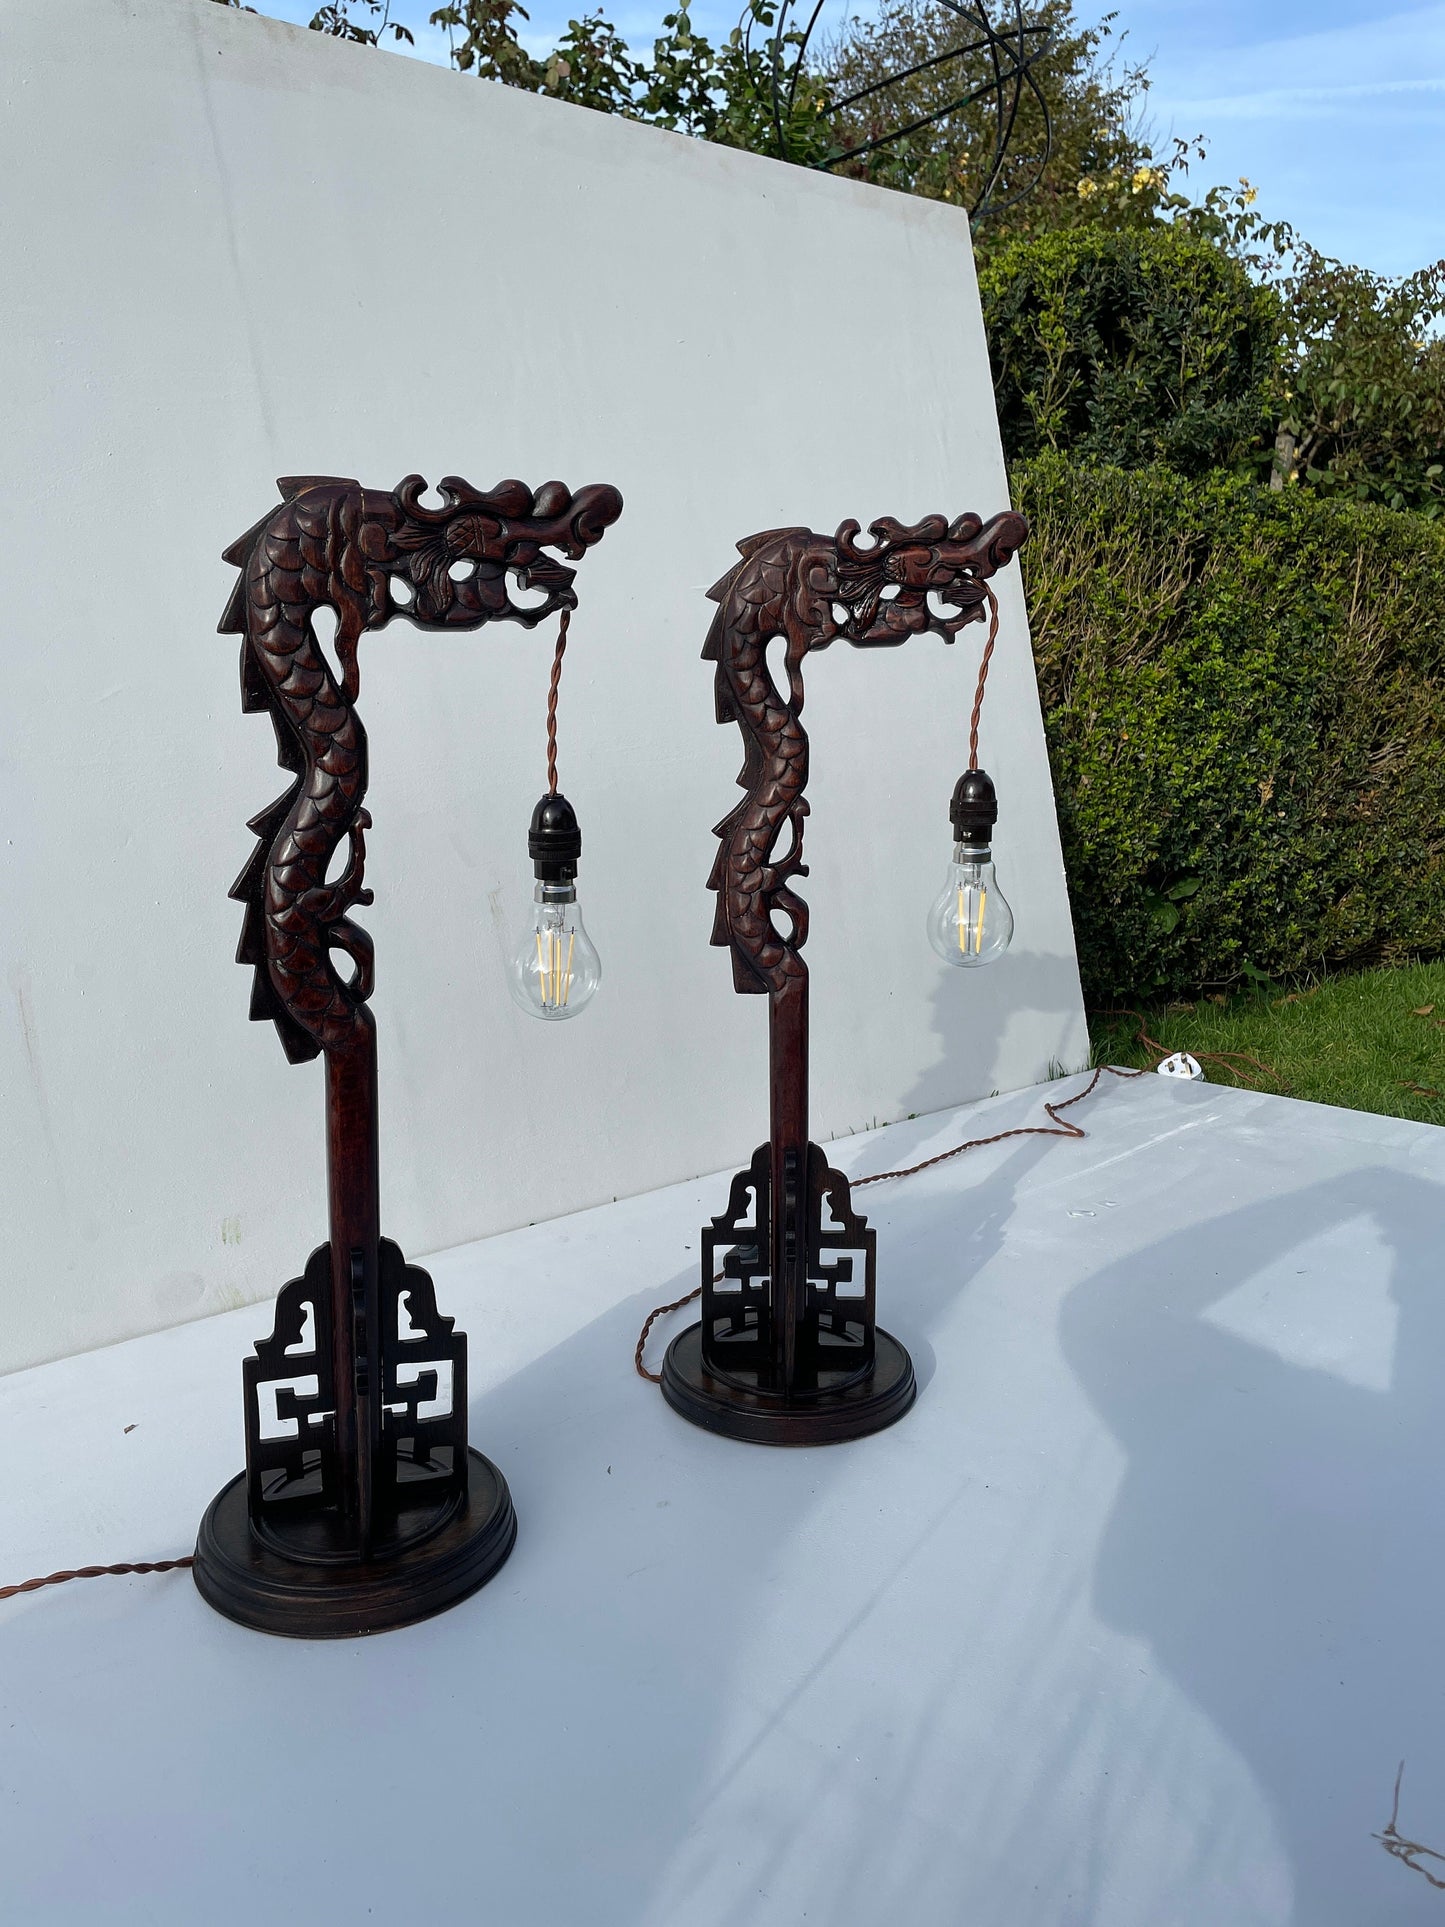 A Pair Of Antique Hand Carved Hardwood Oriental Dragon Table Lamps 1920's